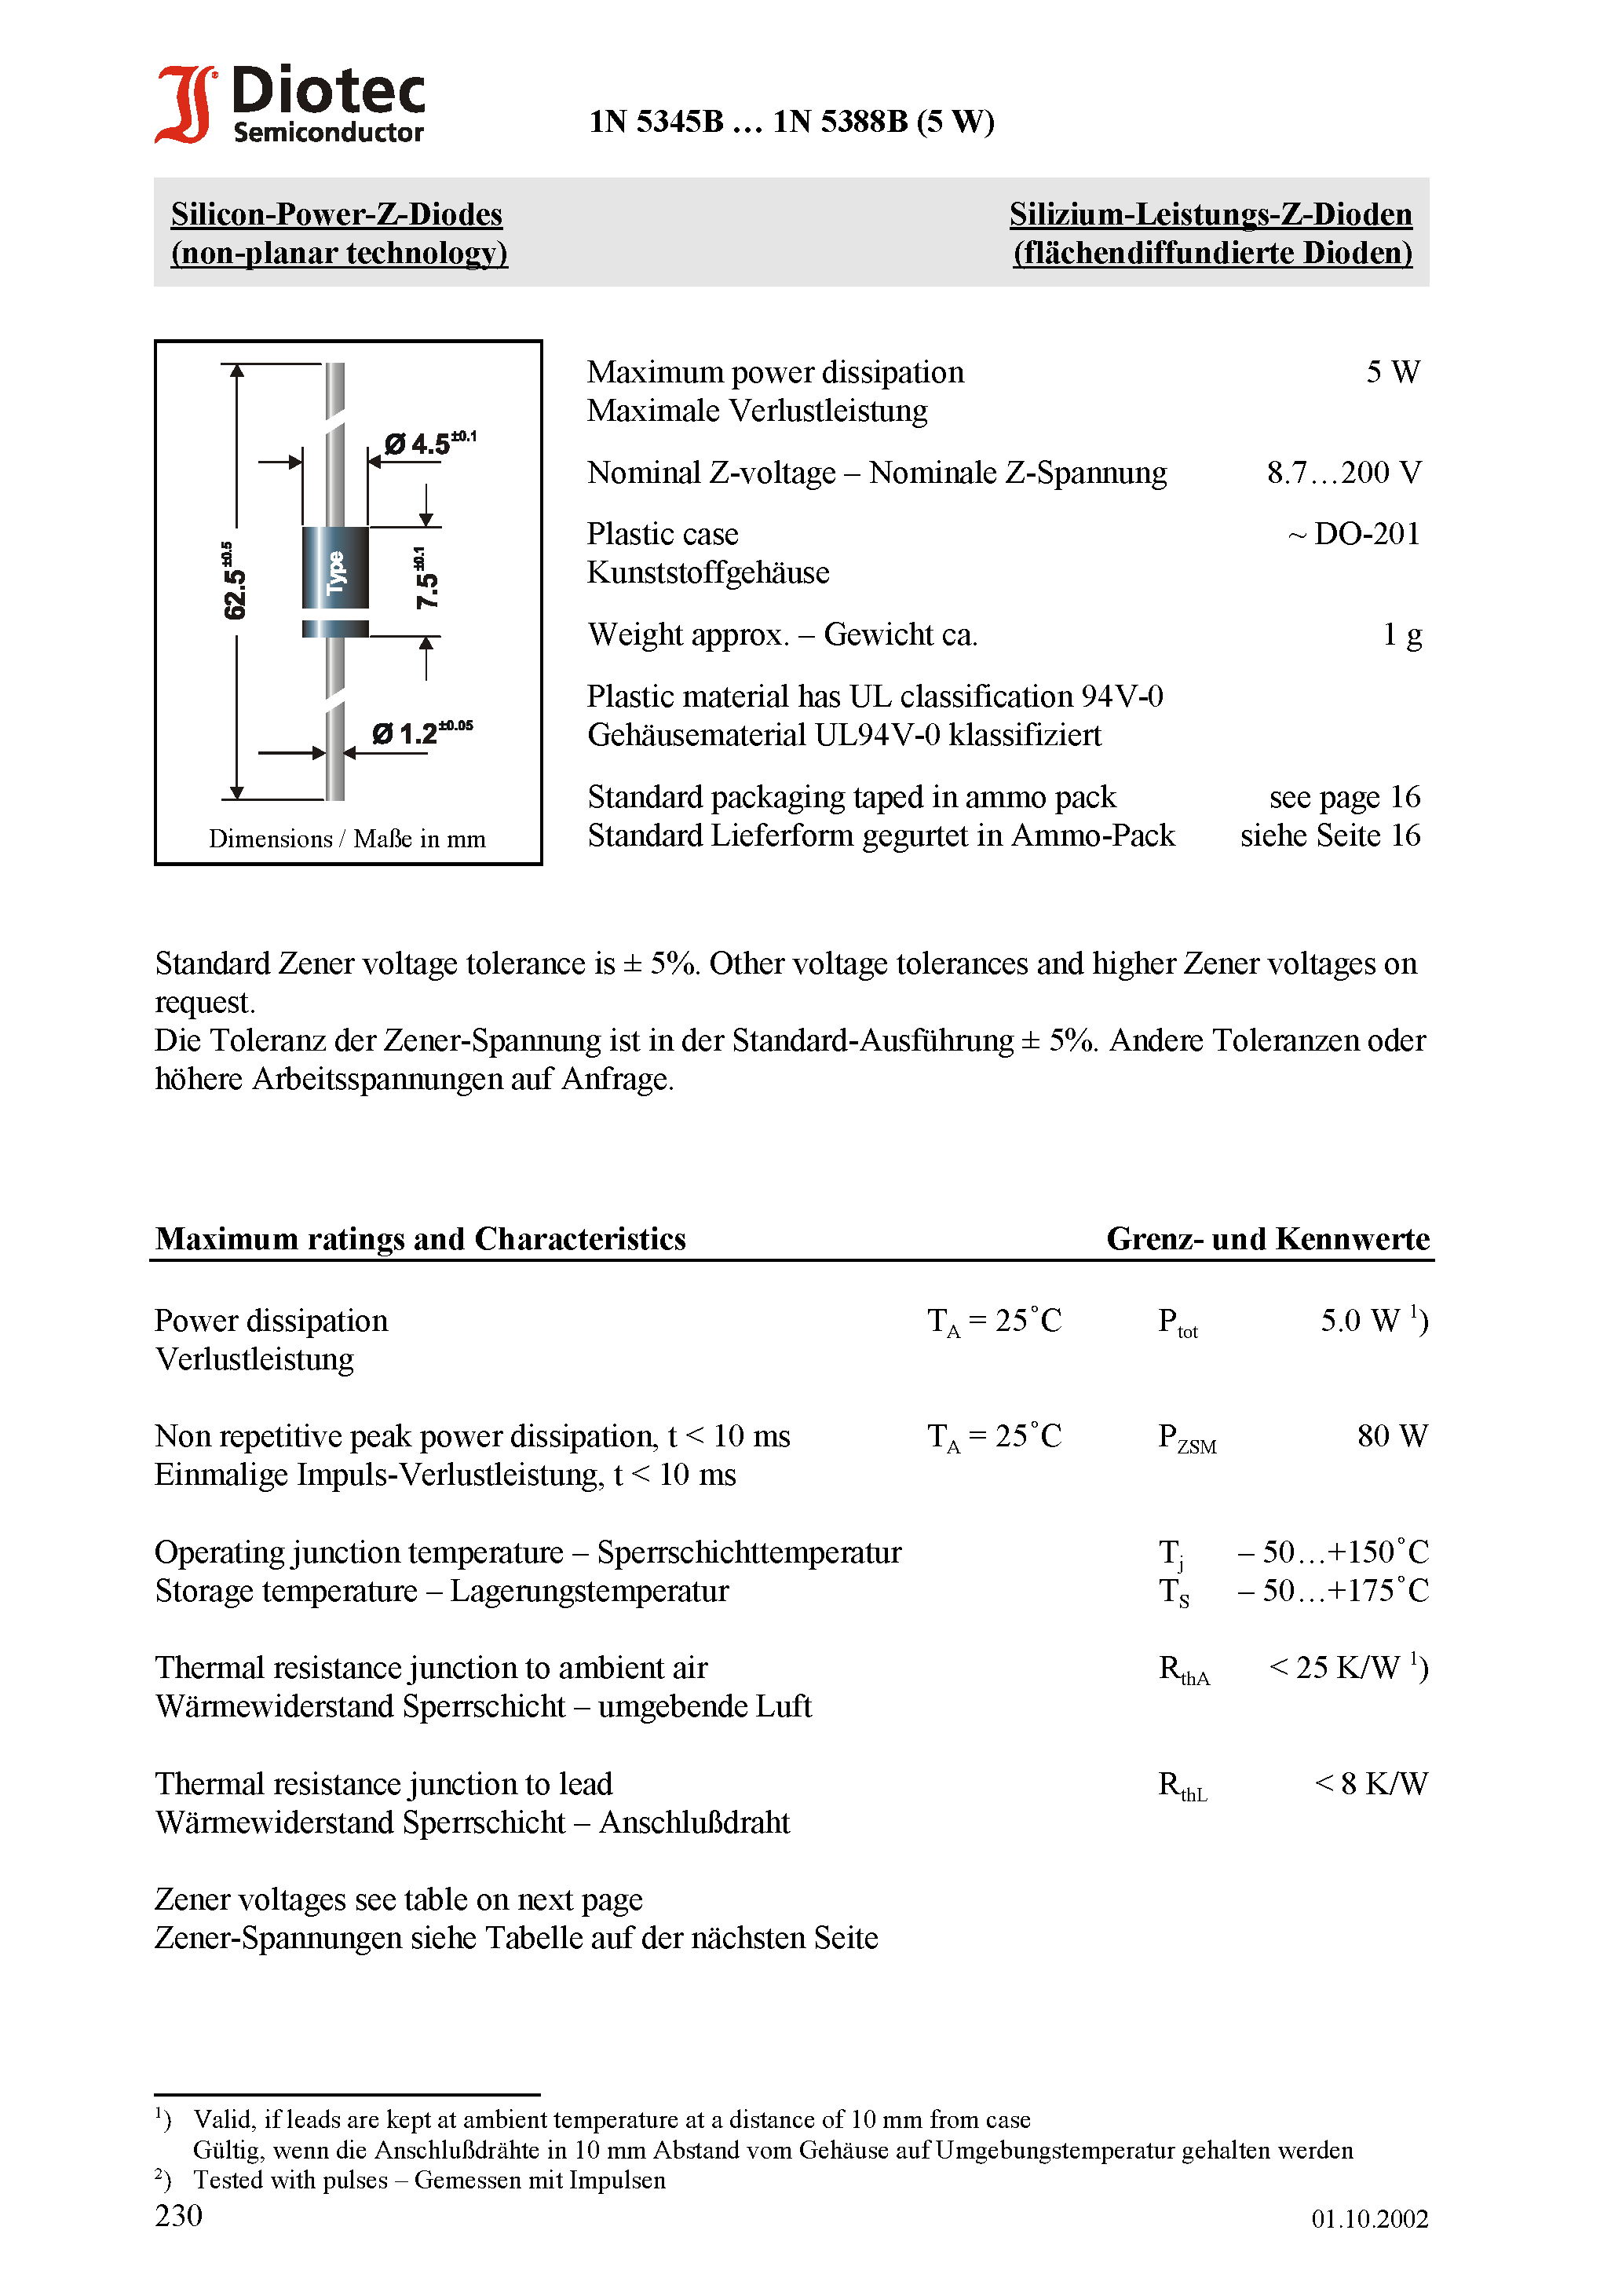 Datasheet 1N5347B - Silicon-Power-Z-Diodes (non-planar technology) page 1